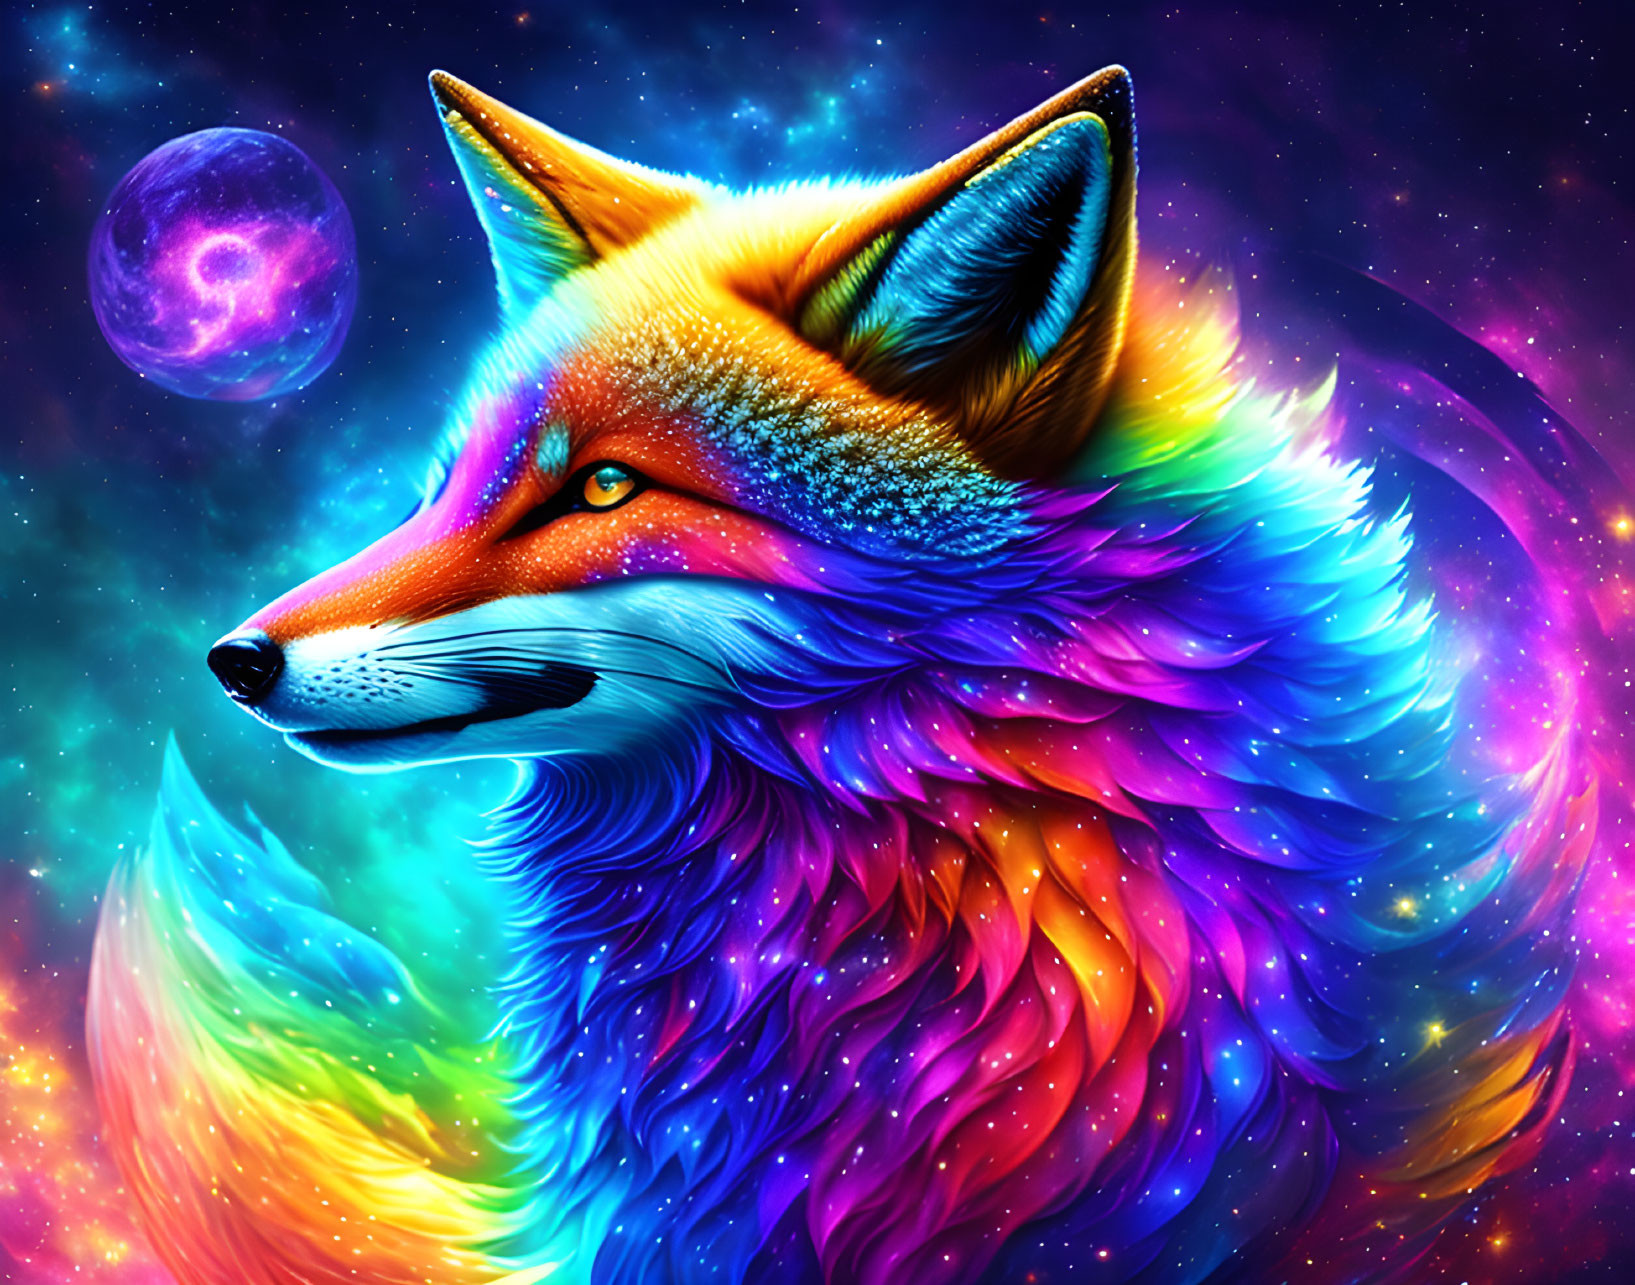 Colorful Cosmic Fox with Multicolored Fur in Starry Space Scene